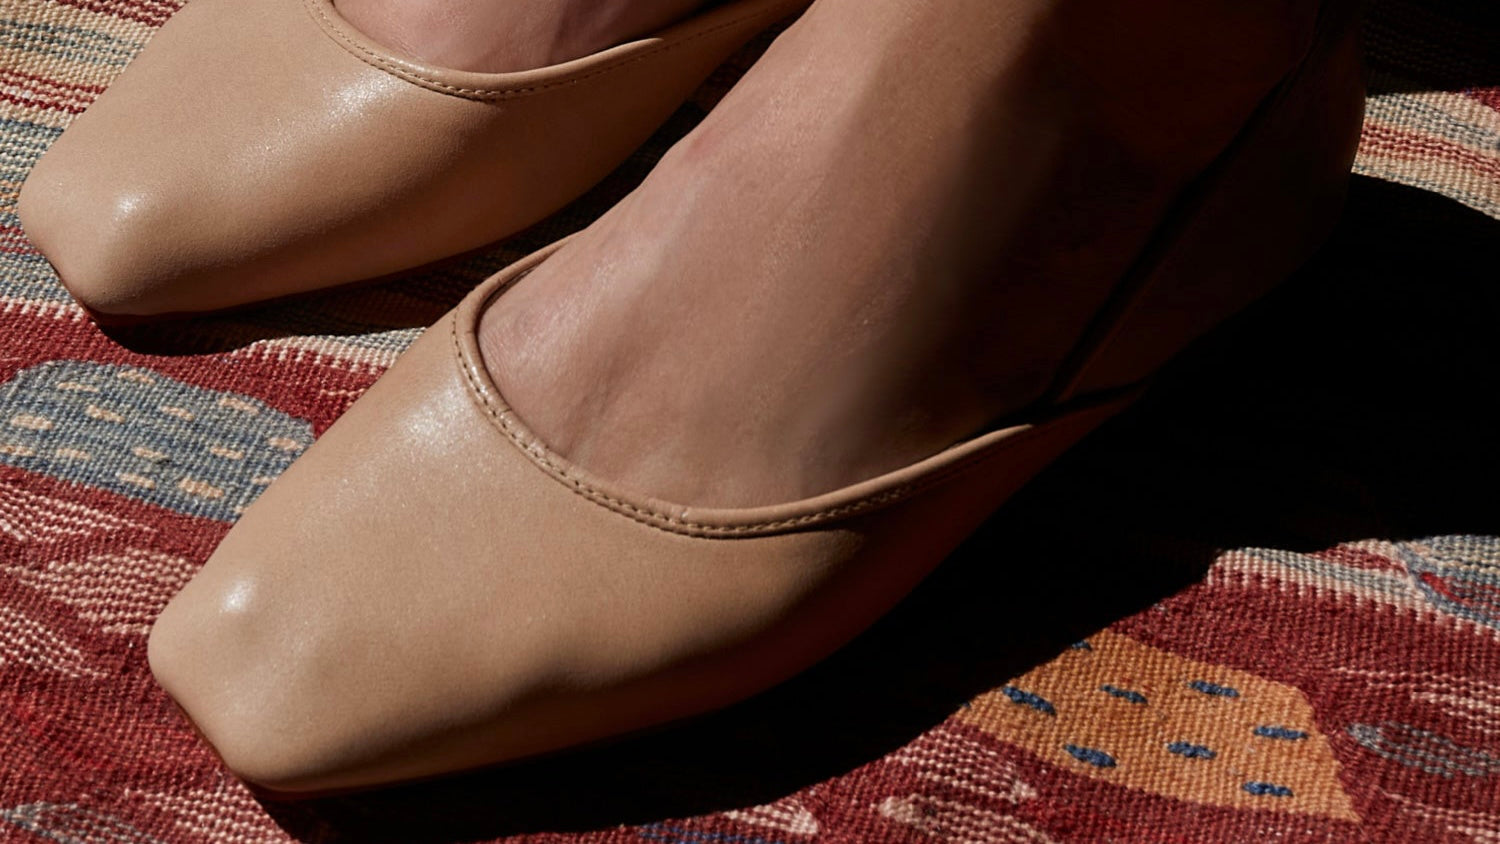 fitted nude leather ballet flats over a colorful rug